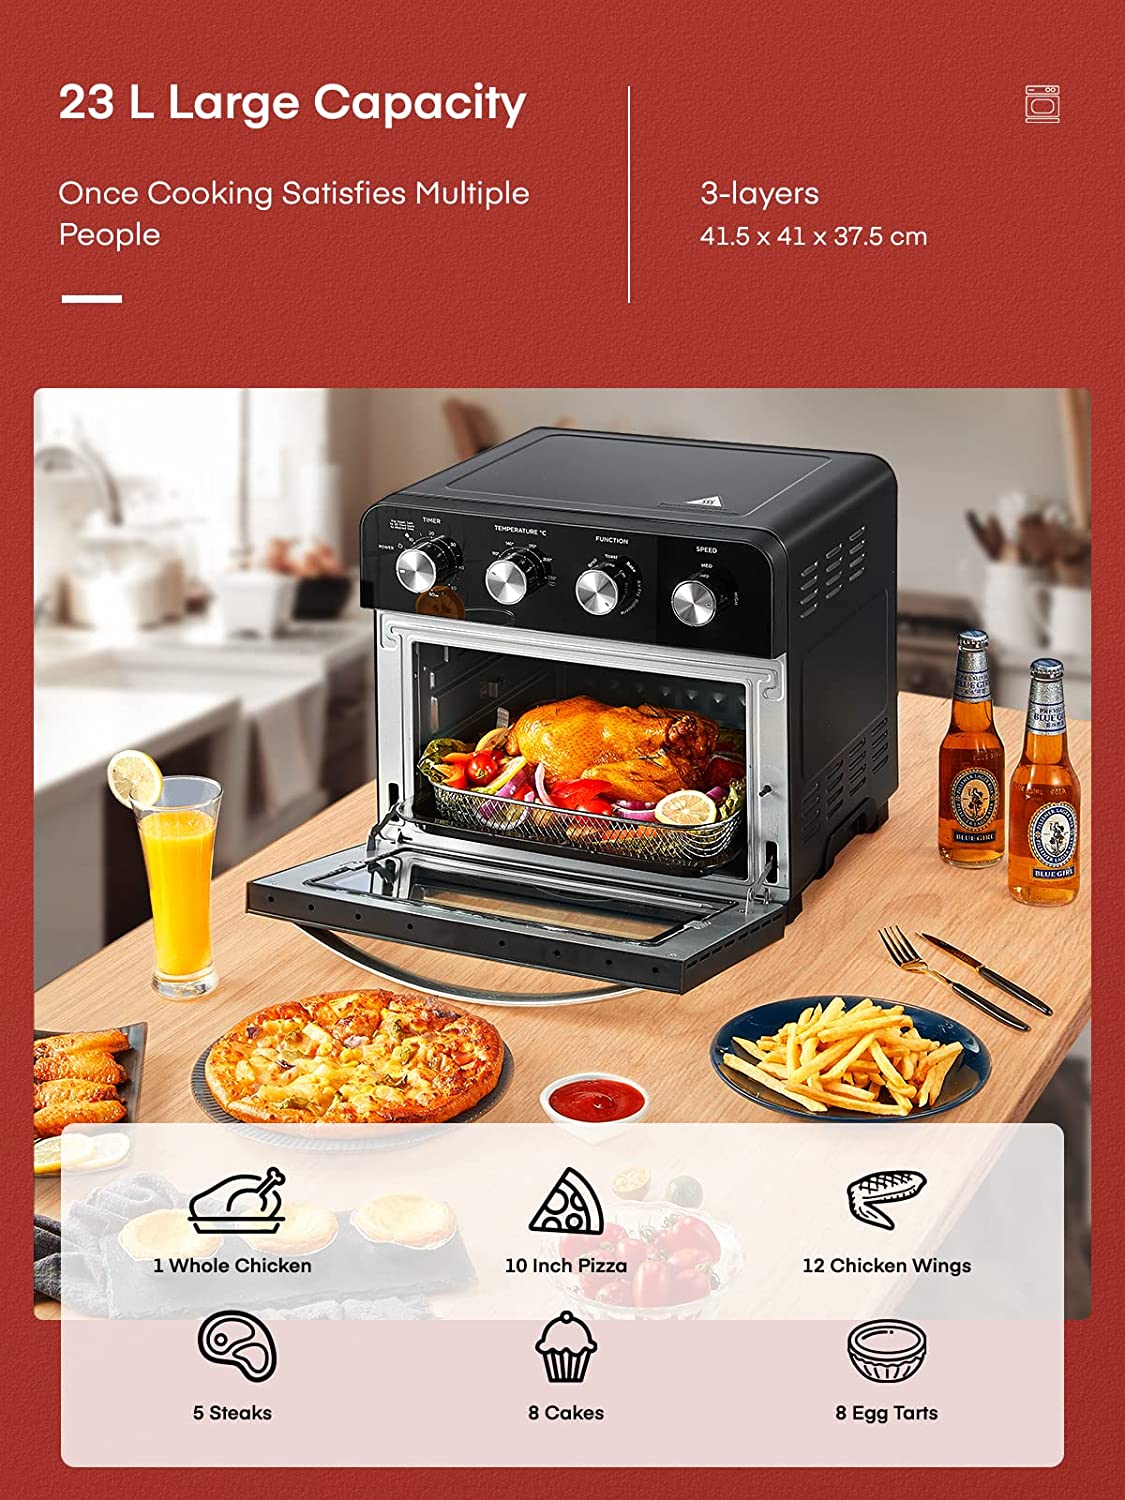 23L large capacity, FOHERE Air Fryer Oven Combo, 6 Slice 24 QT Multi-function Convection Oven, 1700W Toaster Oven for Rotisserie, Dehydrate, Air Fry, Bake & Reheat, Fry Oil-Free, Non-Stick Inner, 6 Accessories & 100 Recipes